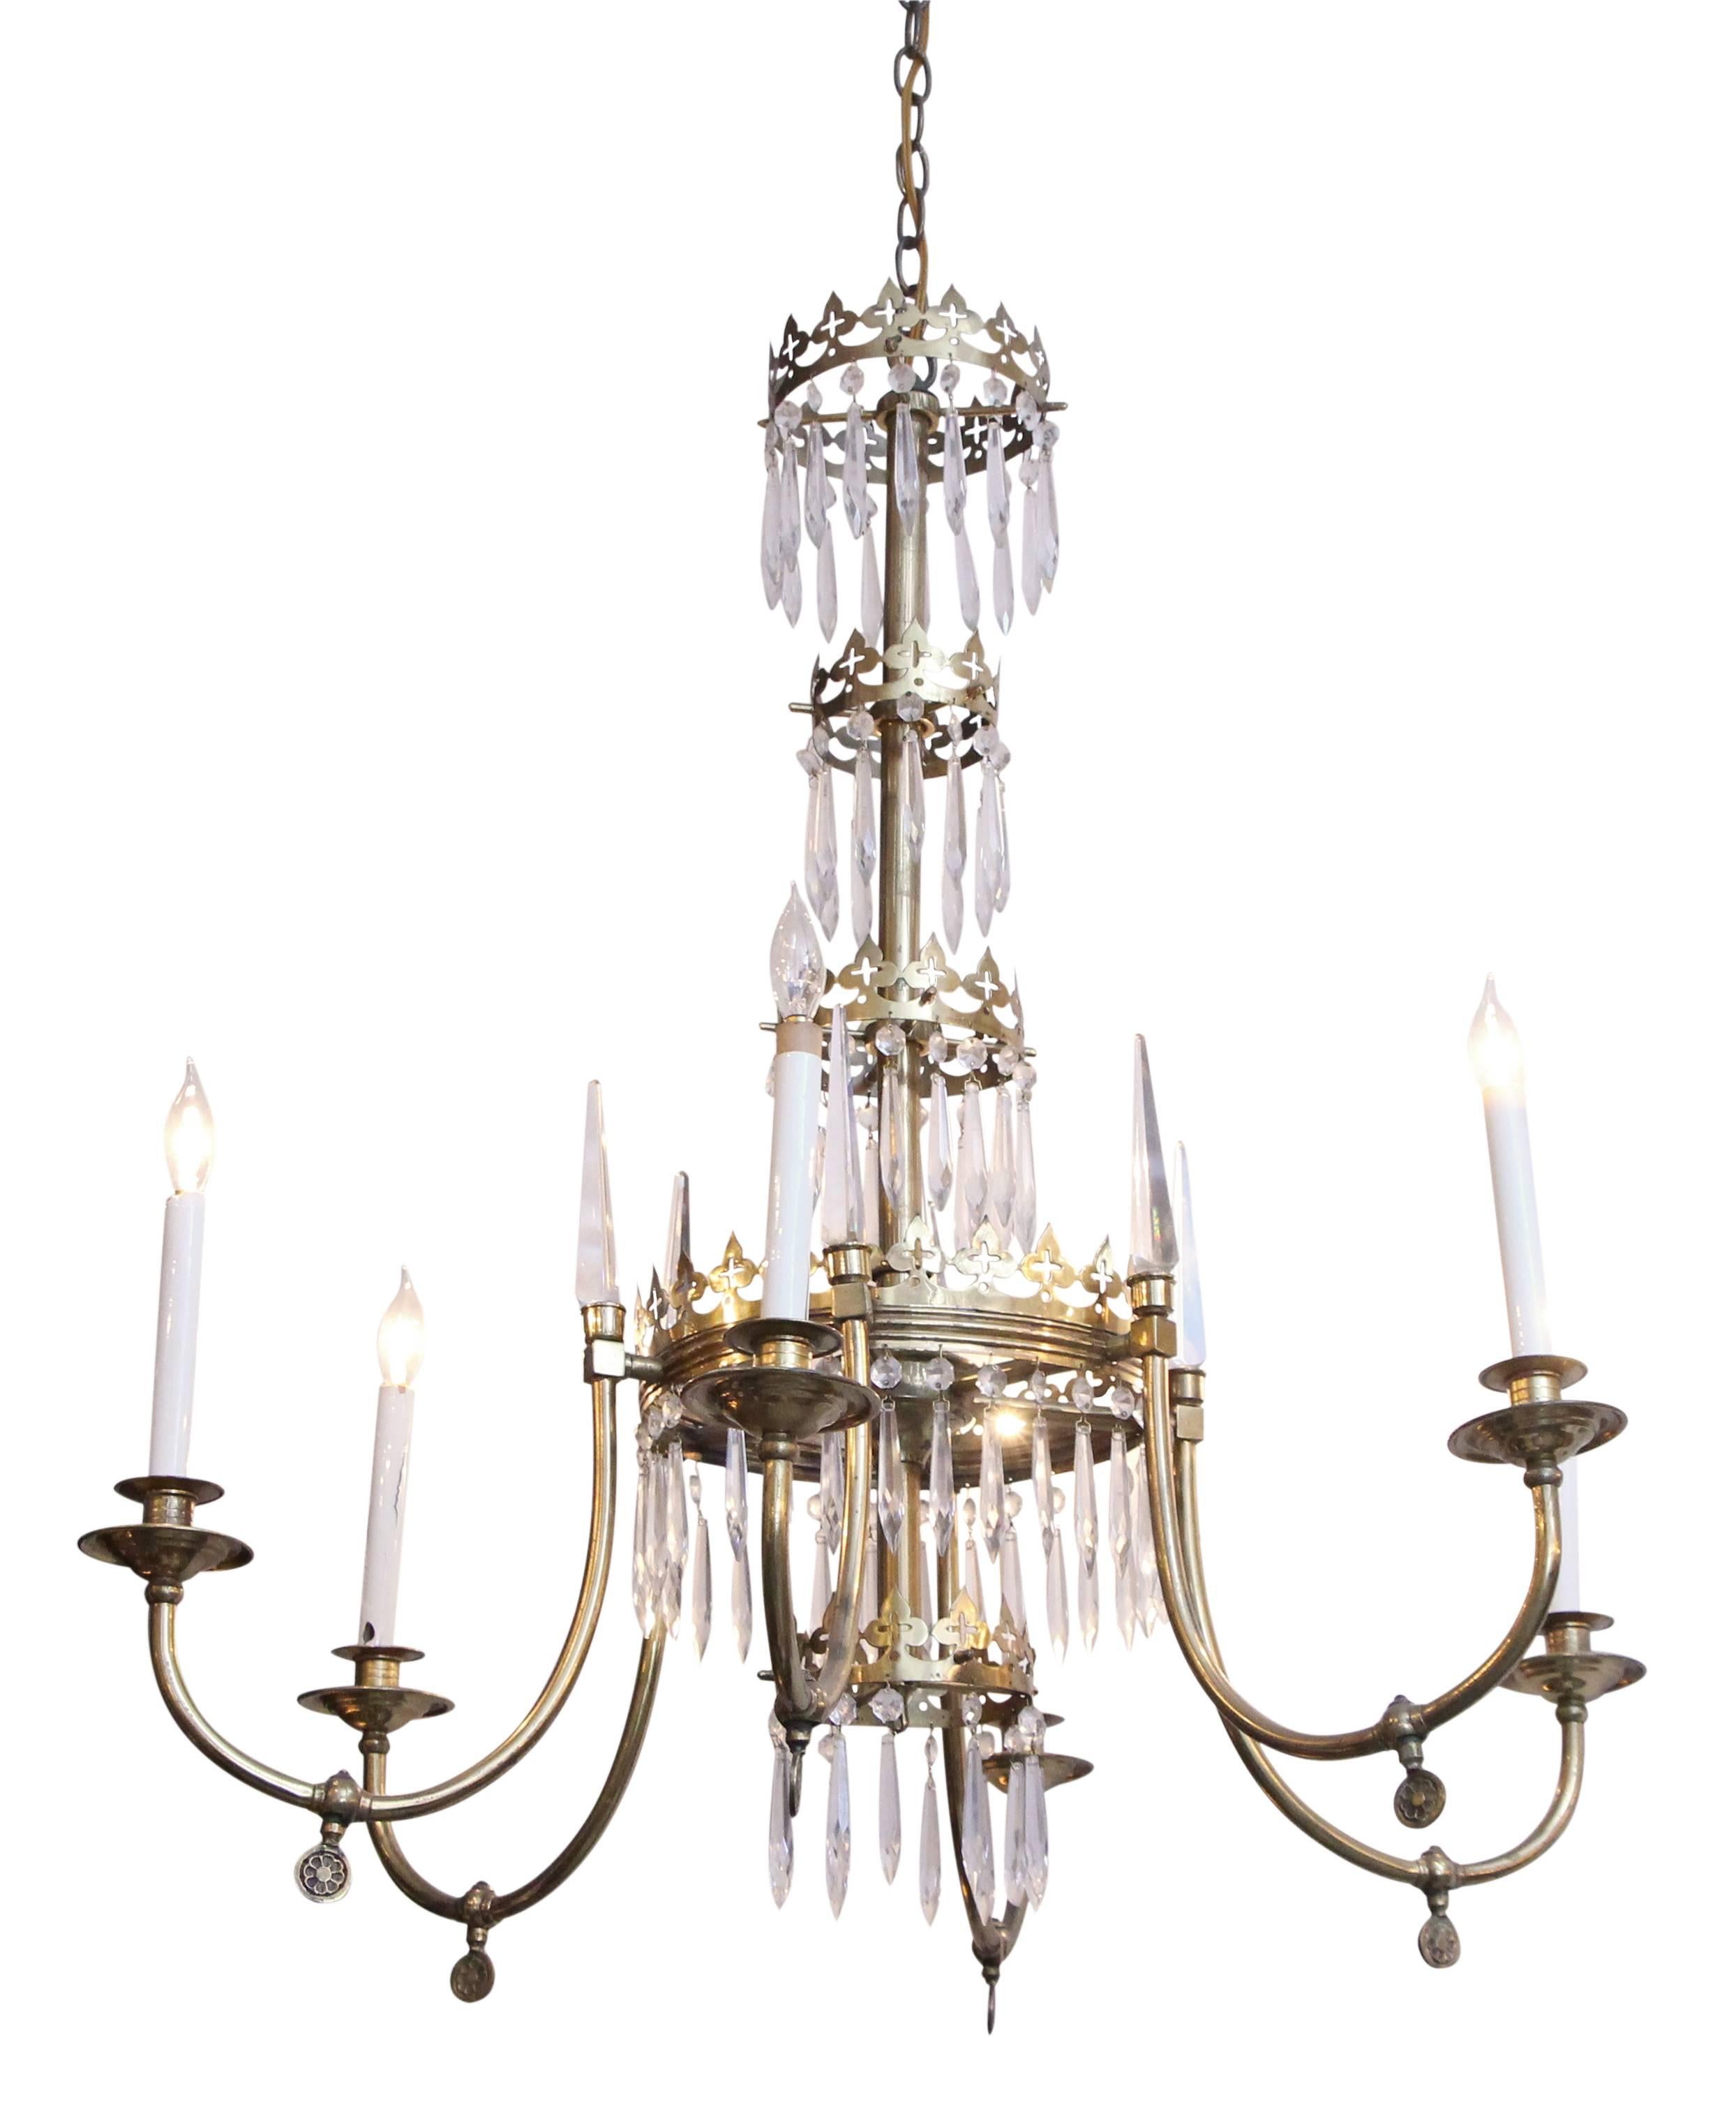 Baltic style six arm chandelier with crystal spikes. Cleaned and rewired. Please note, this item is located in one of our NYC locations.